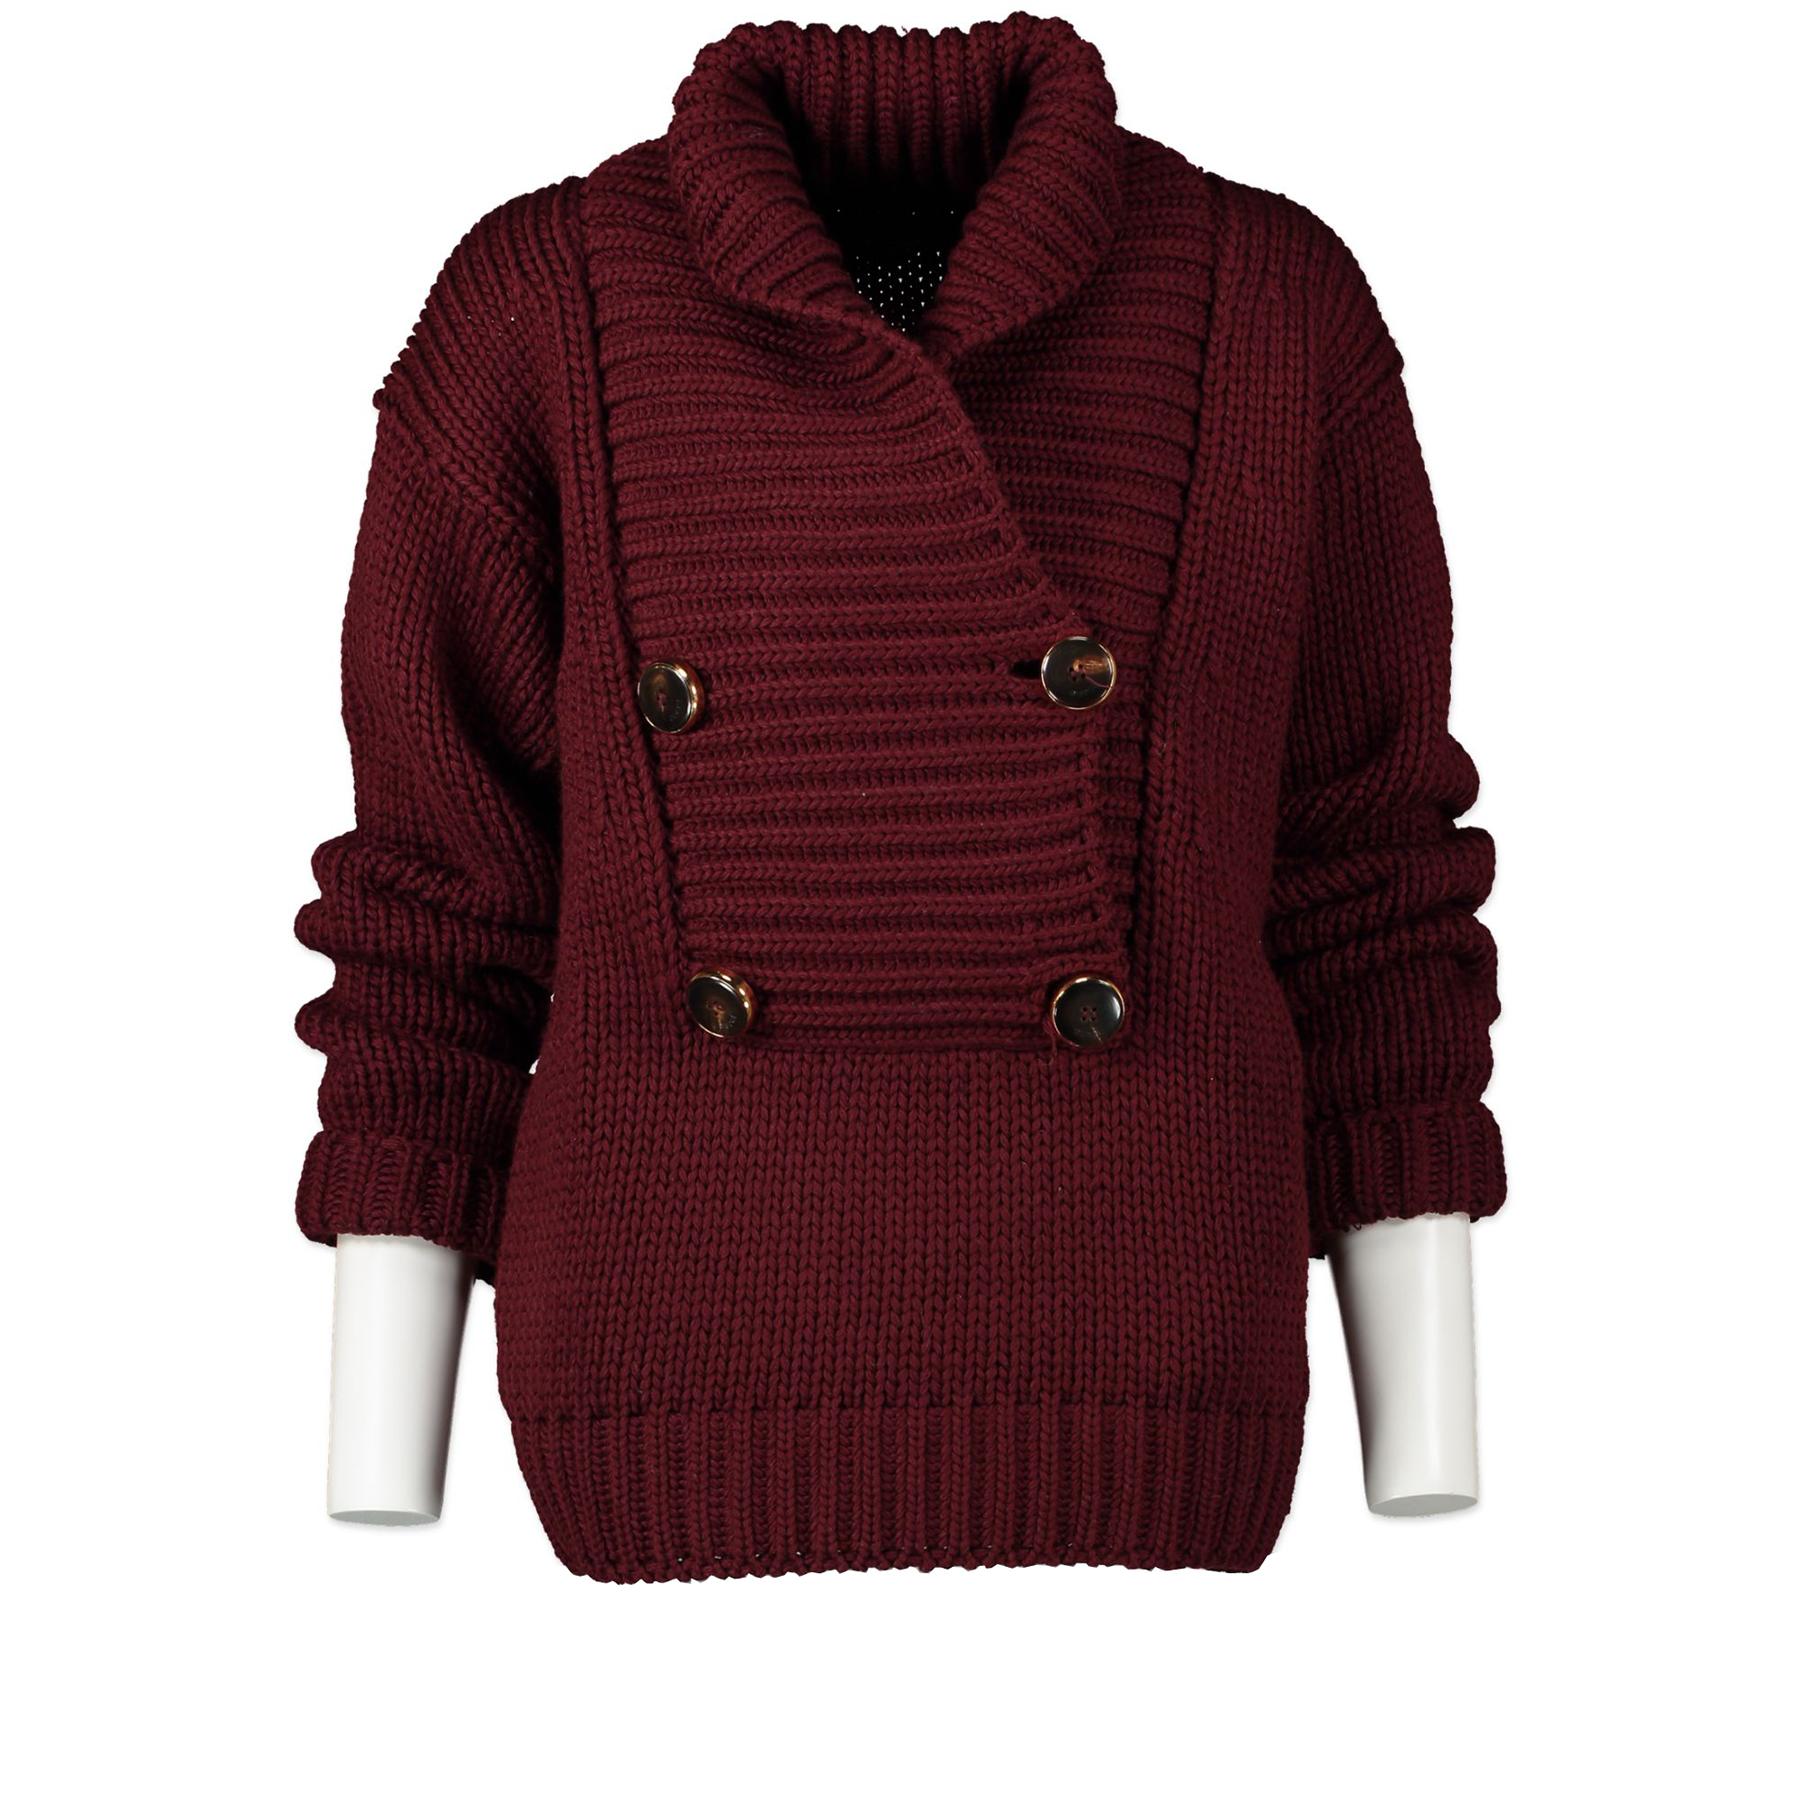 Gucci Burgundy Knitted Sweater - Size XS In Good Condition For Sale In Antwerp, BE